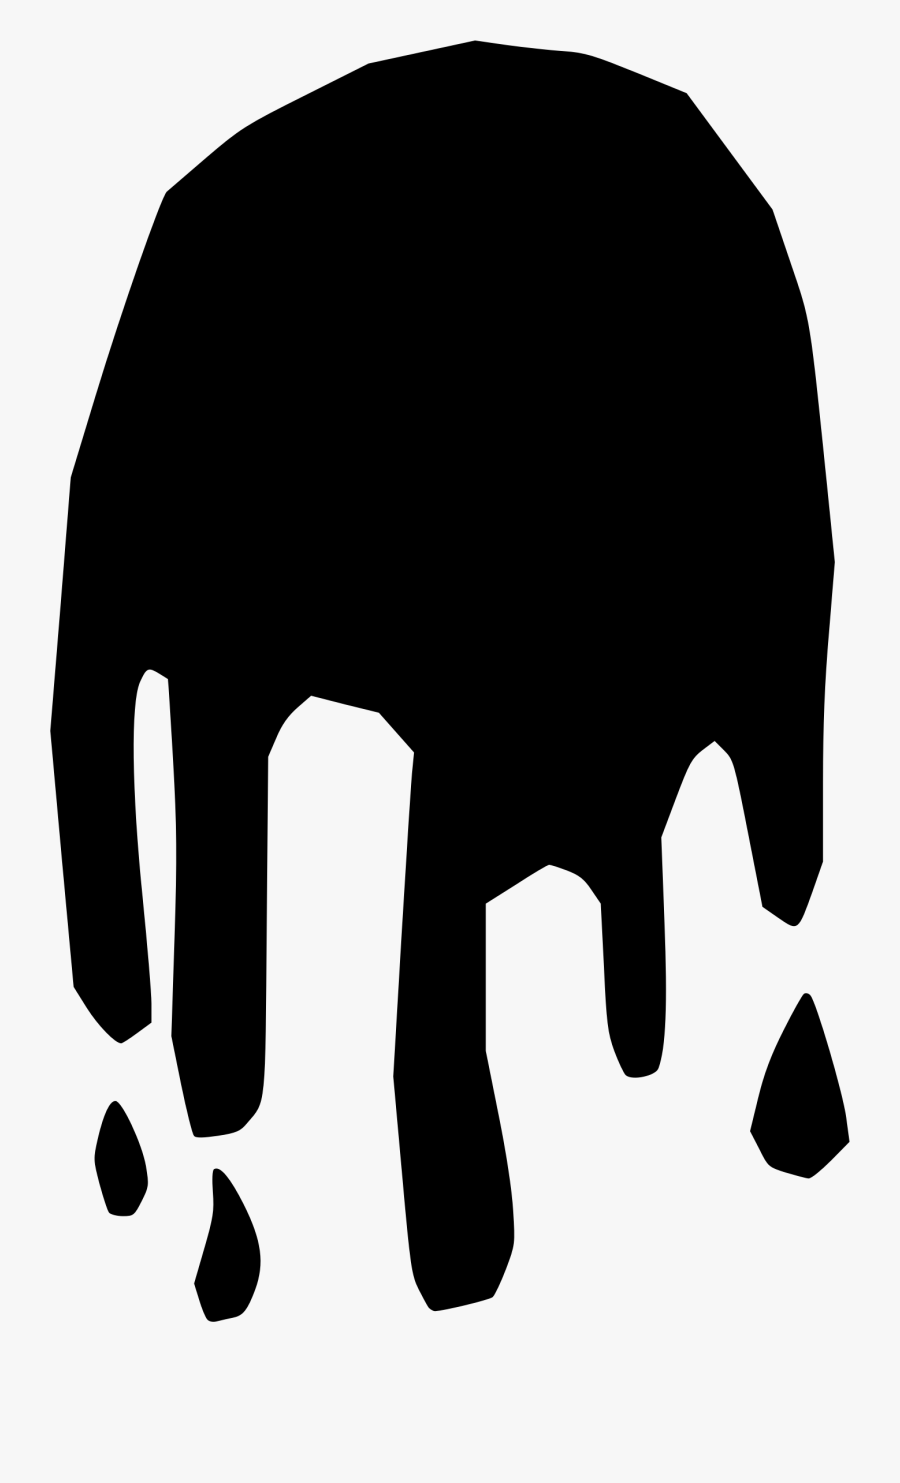 Slime - Slime Silhouette Png, Transparent Clipart